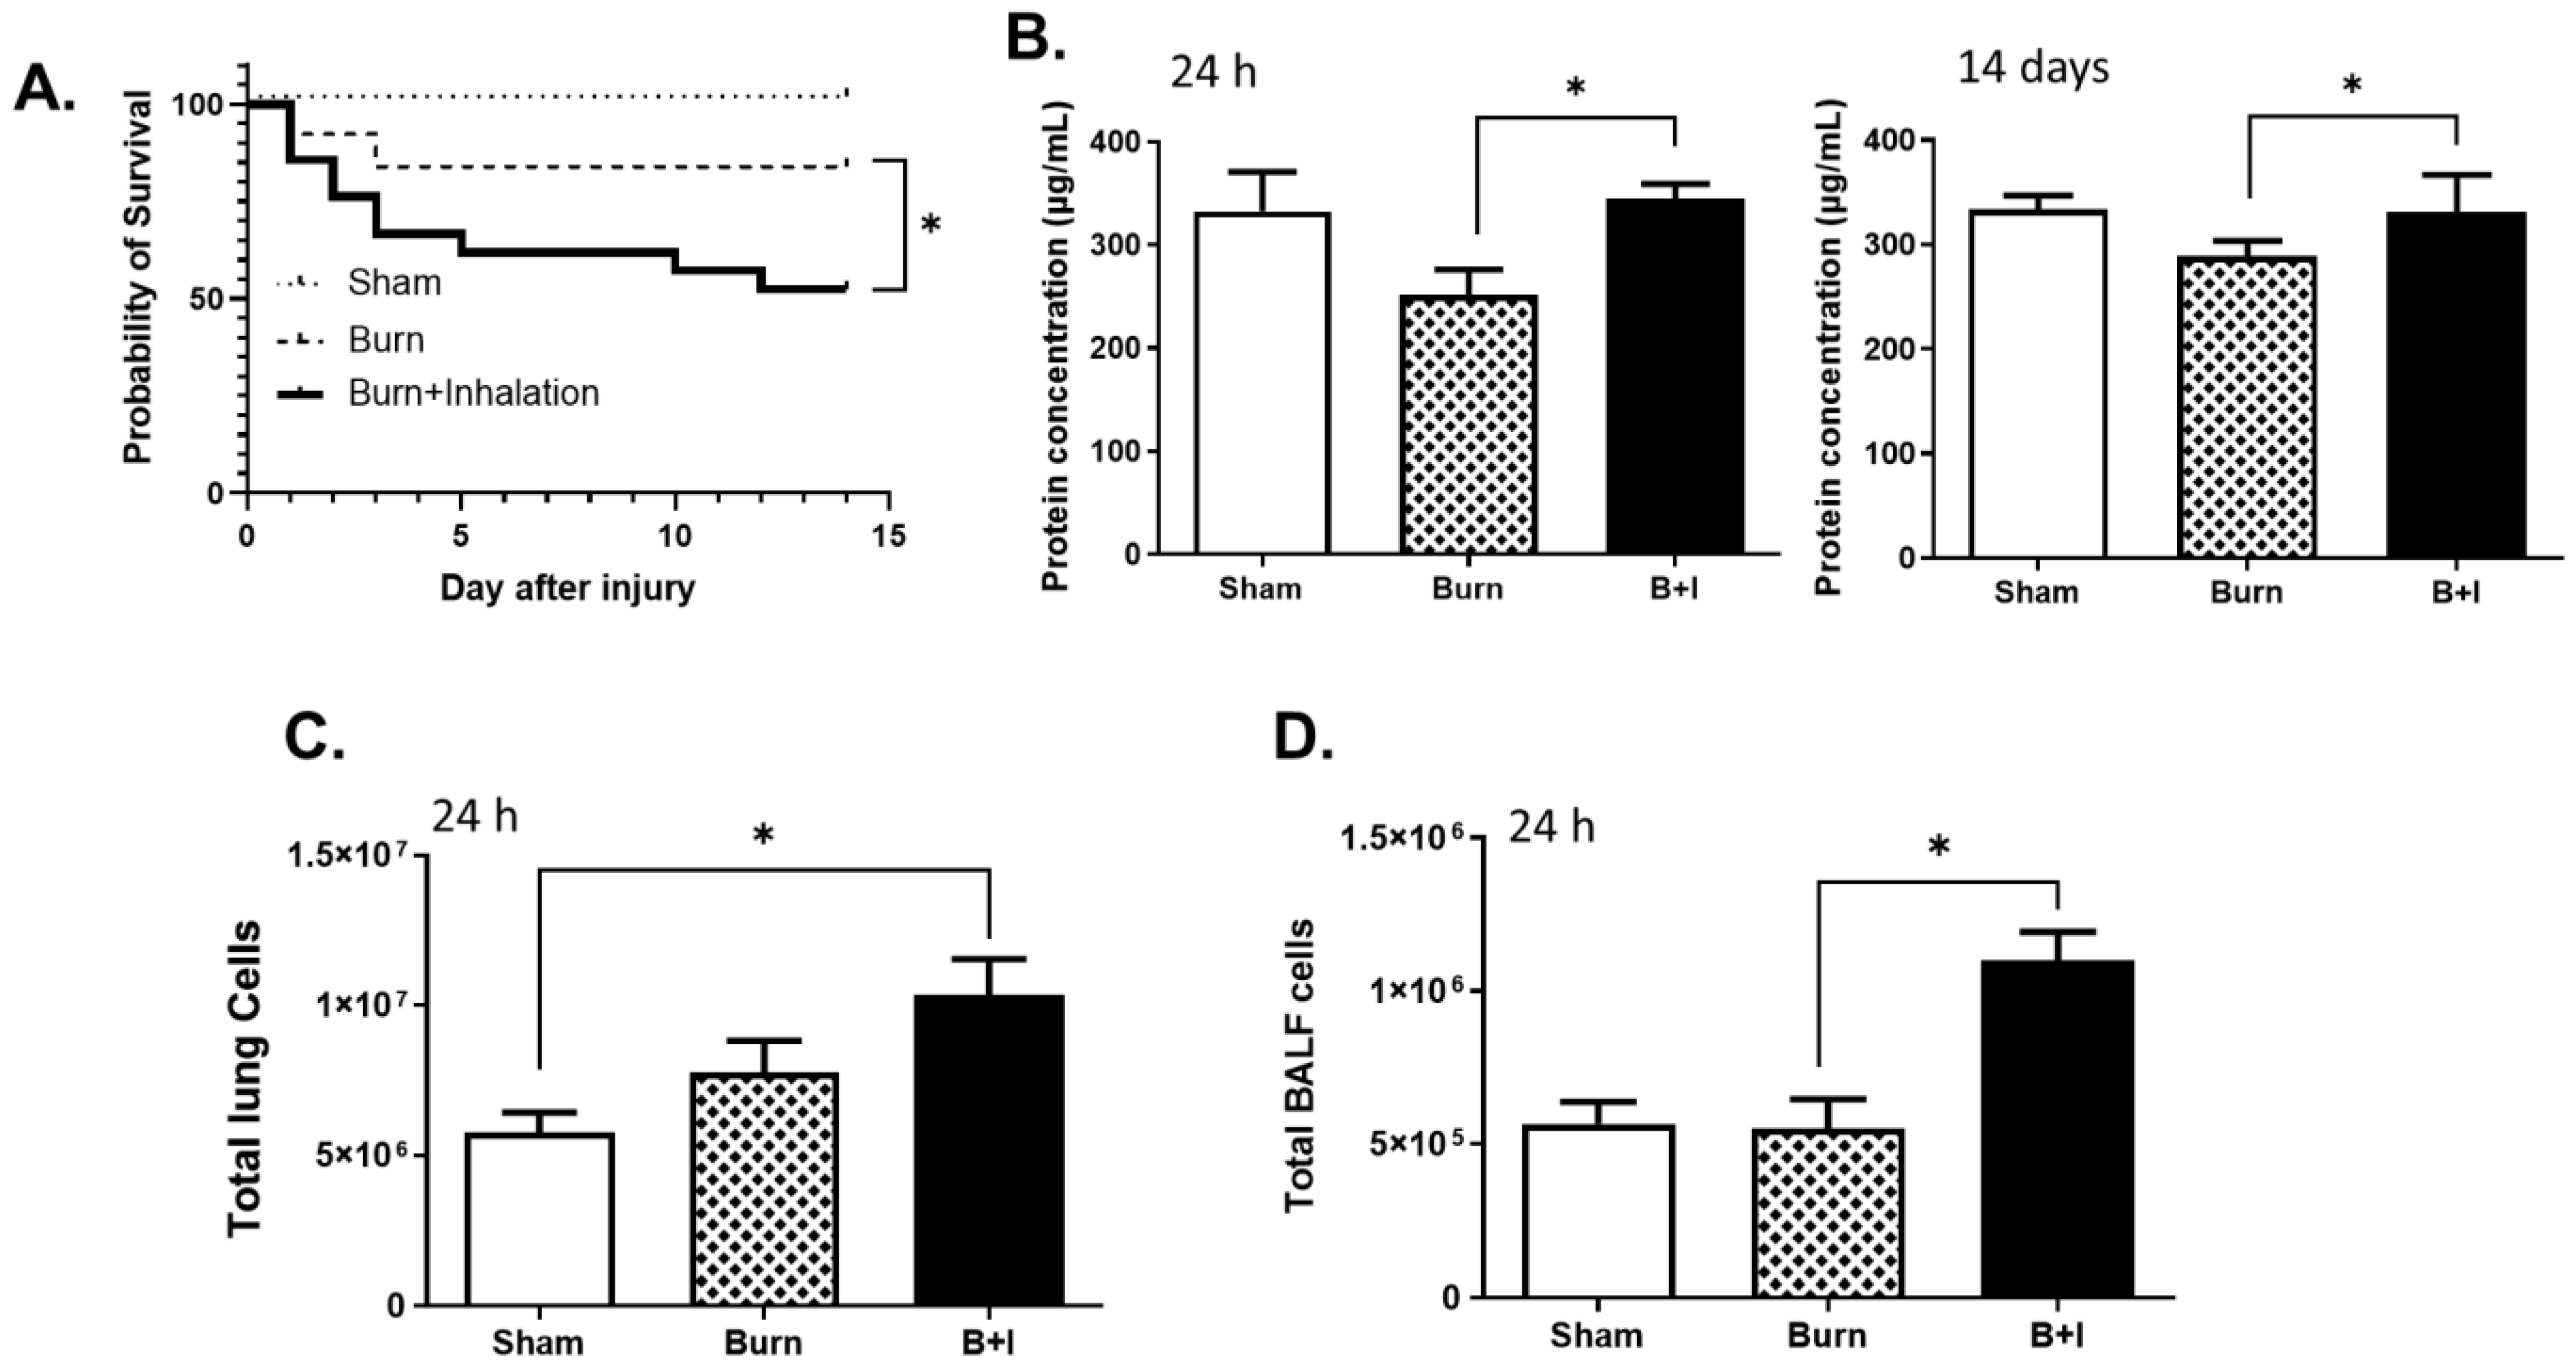 IJMS | Free Full-Text | Characterization of the Basal and mTOR-Dependent  Acute Pulmonary and Systemic Immune Response in a Murine Model of Combined  Burn and Inhalation Injury